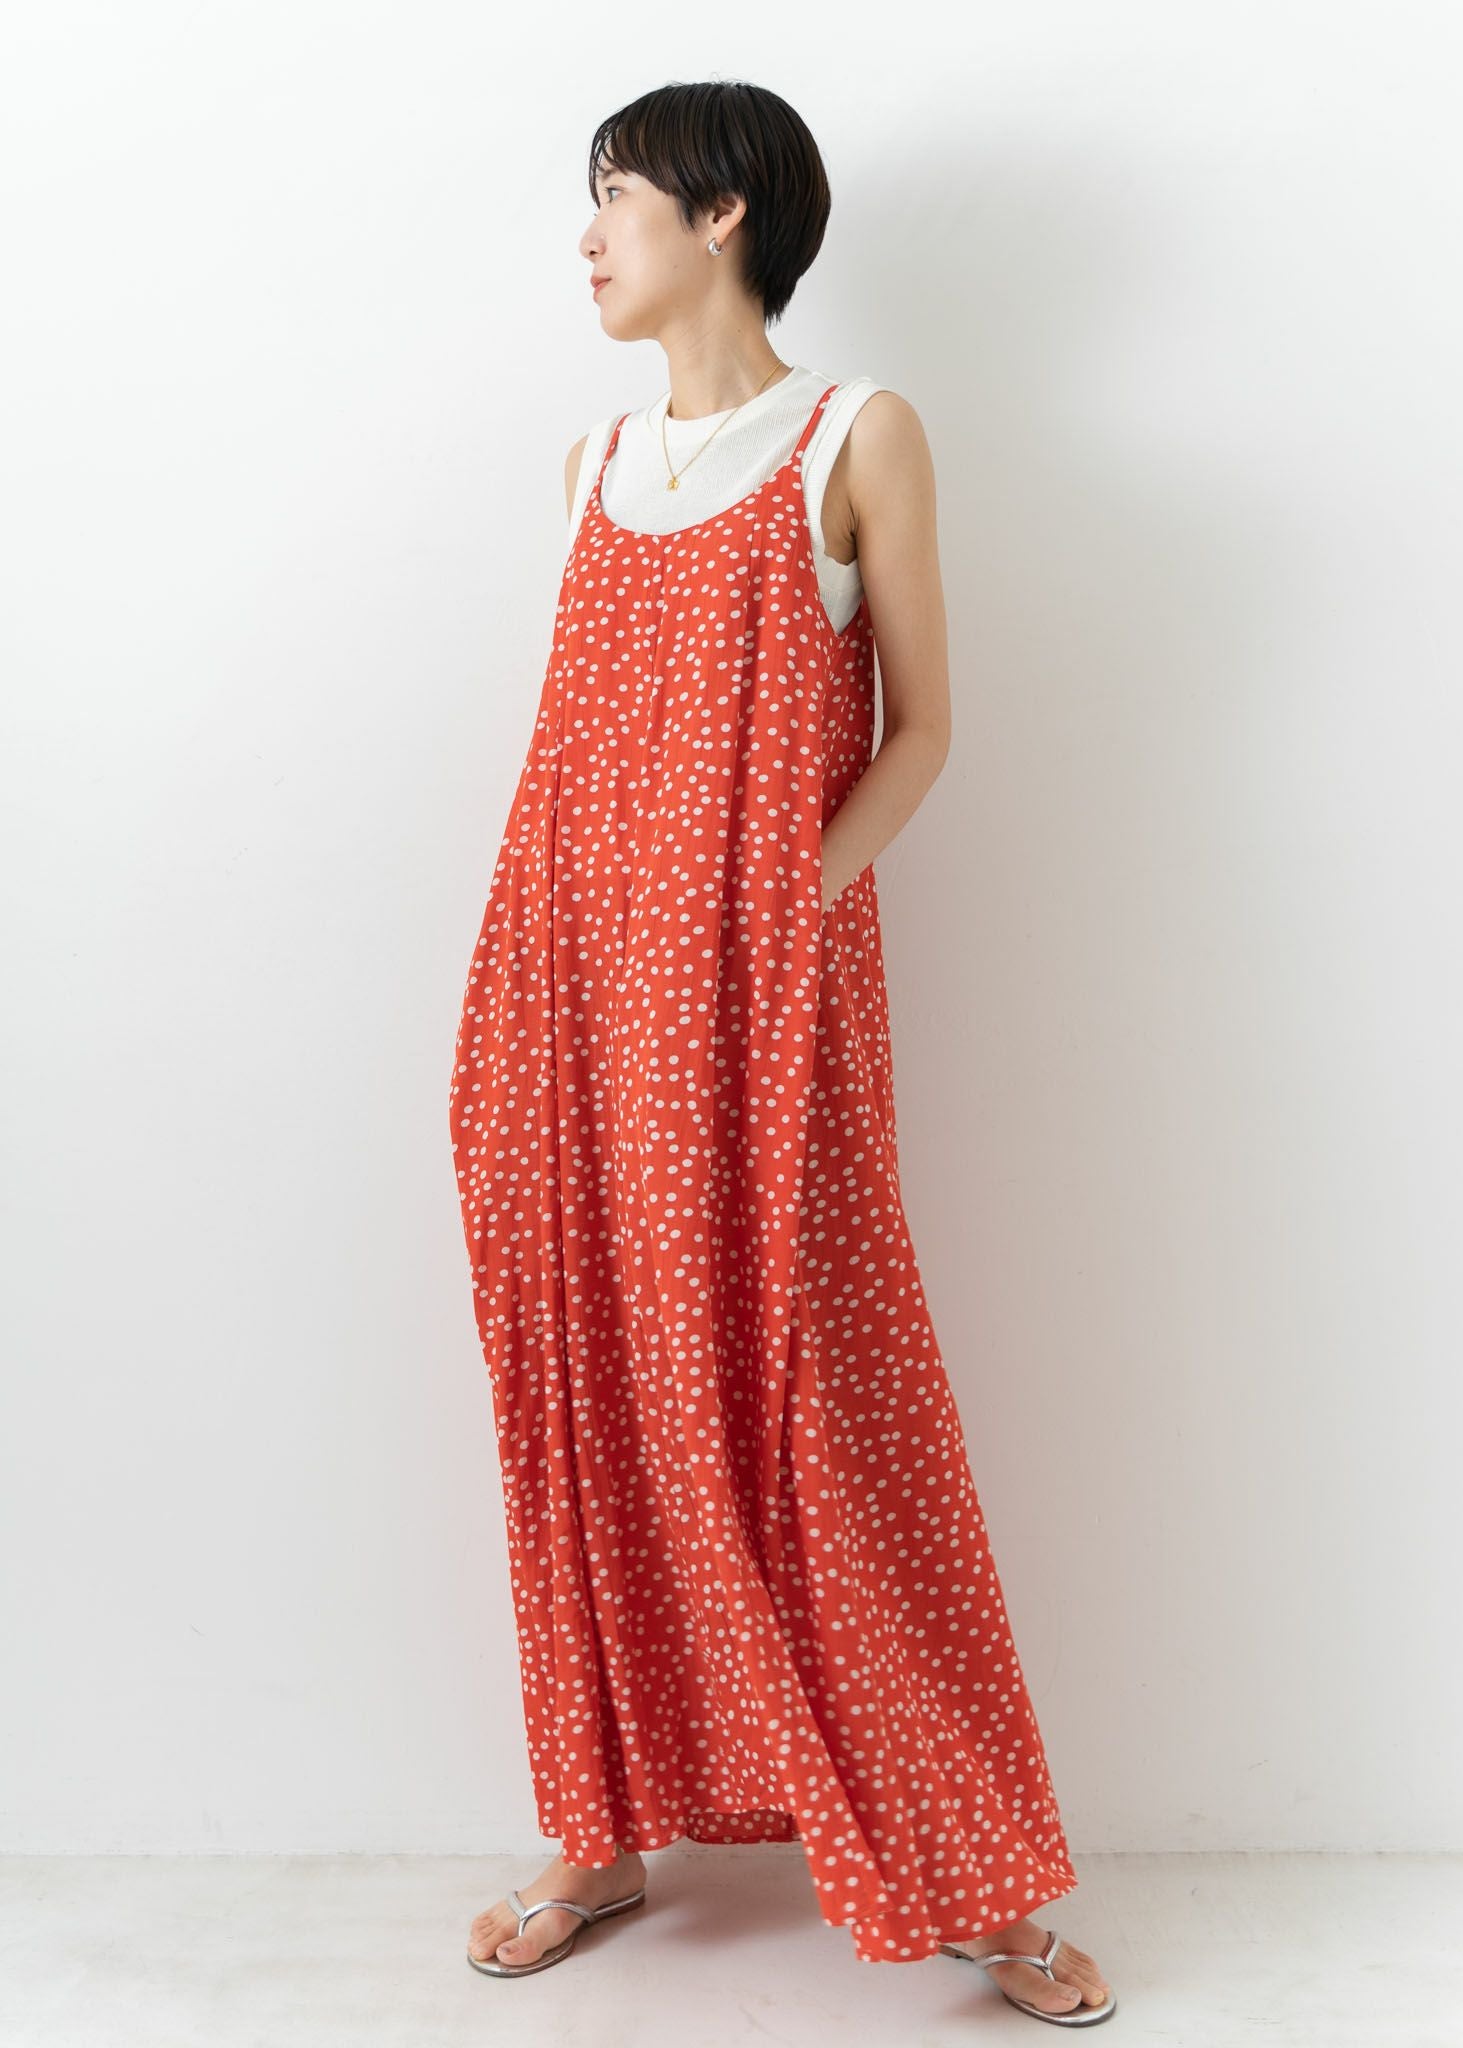 Crepey Natural Rib Tank Top | Pasand by ne Quittez pas | パサン 